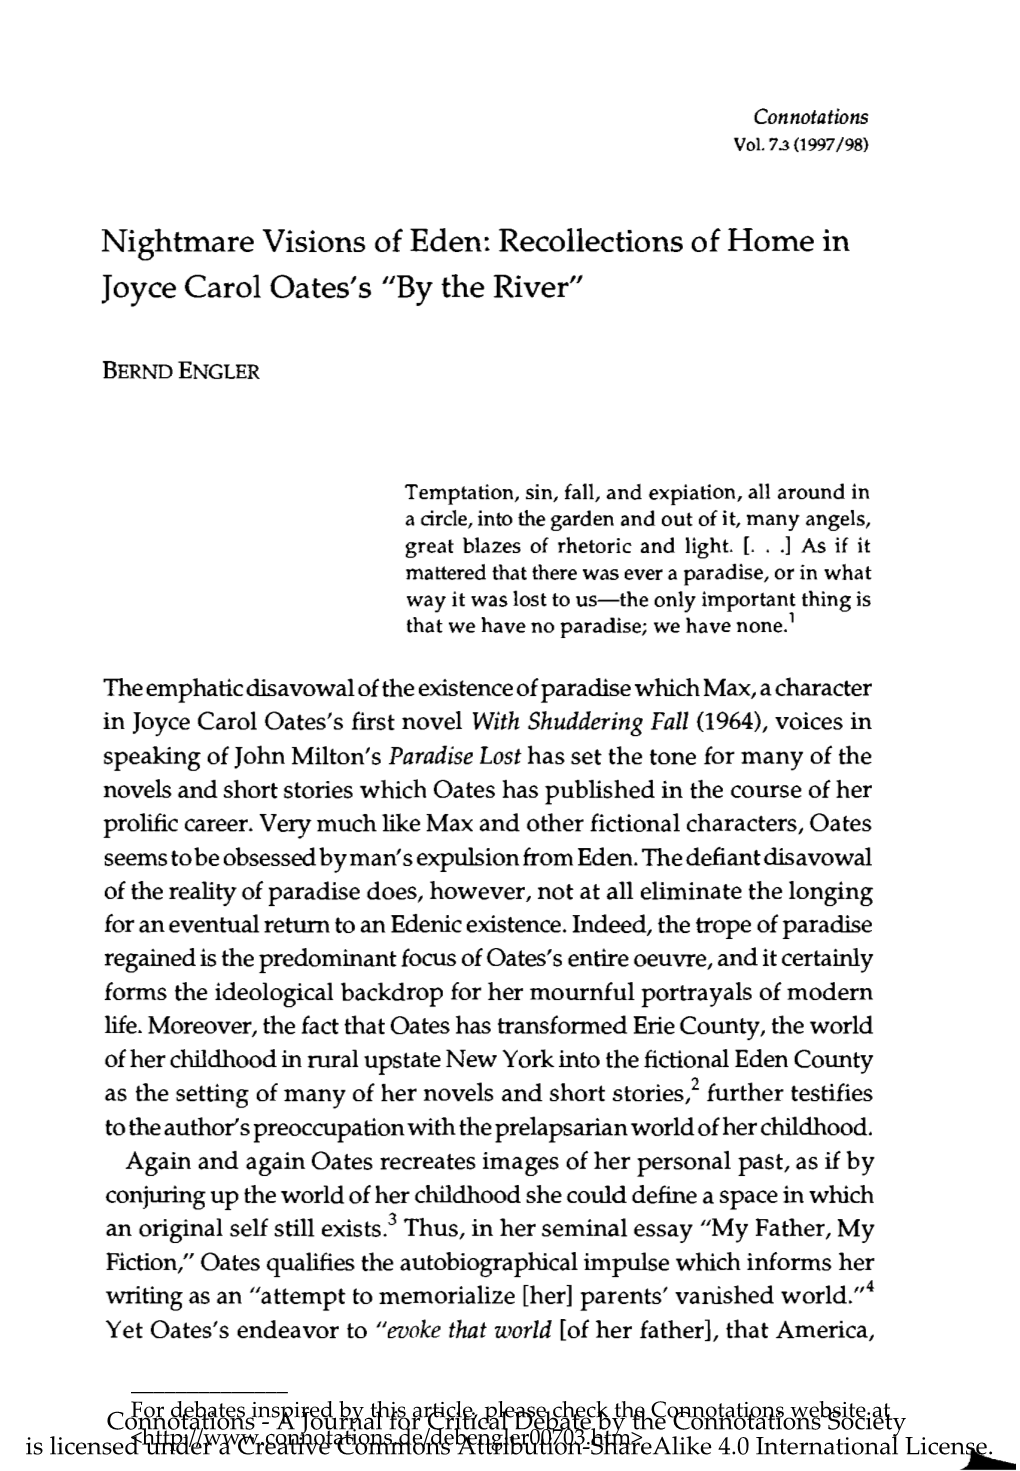 Recollections of Home in Joyce Carol Oates's "By the River"